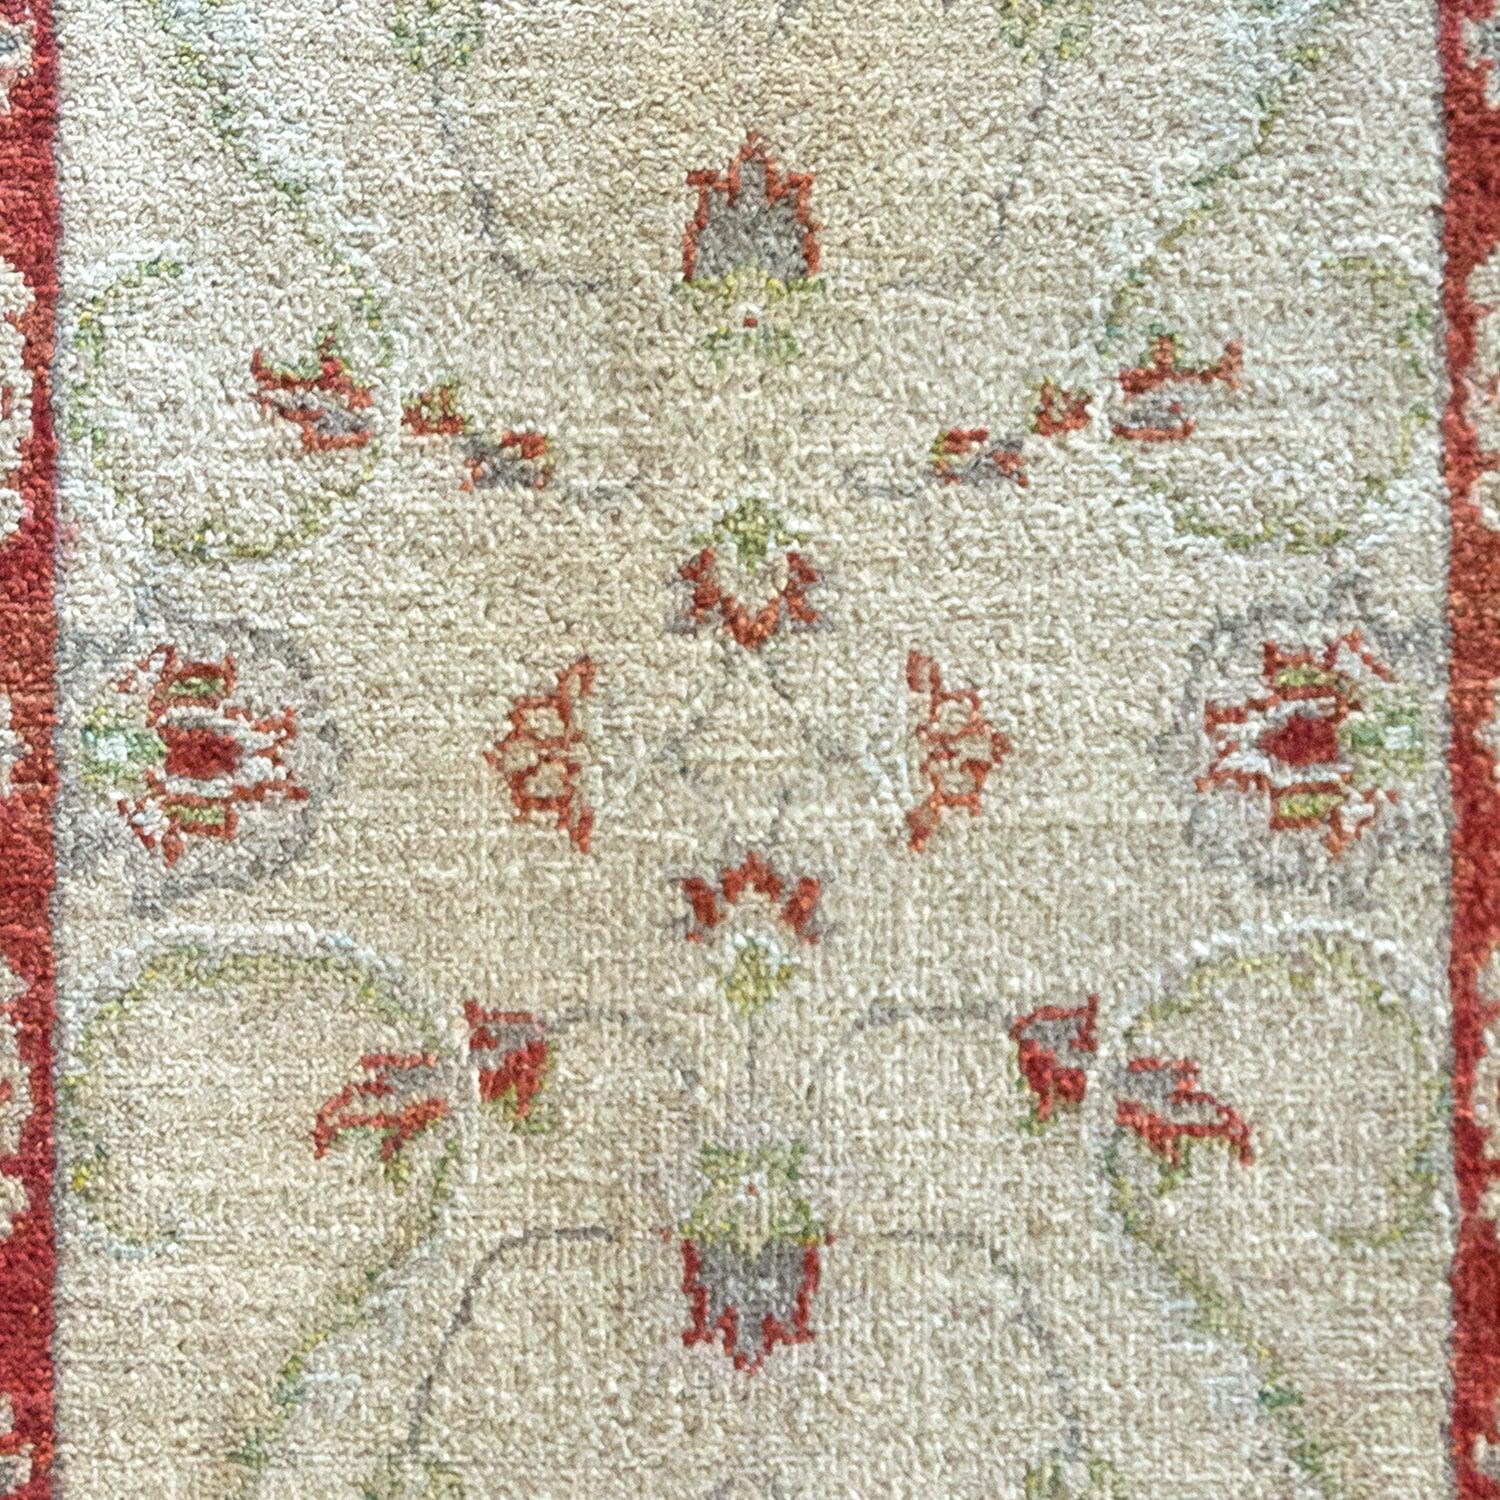 Fine Hand-knotted Wool Small Rug 60cm x 90cm